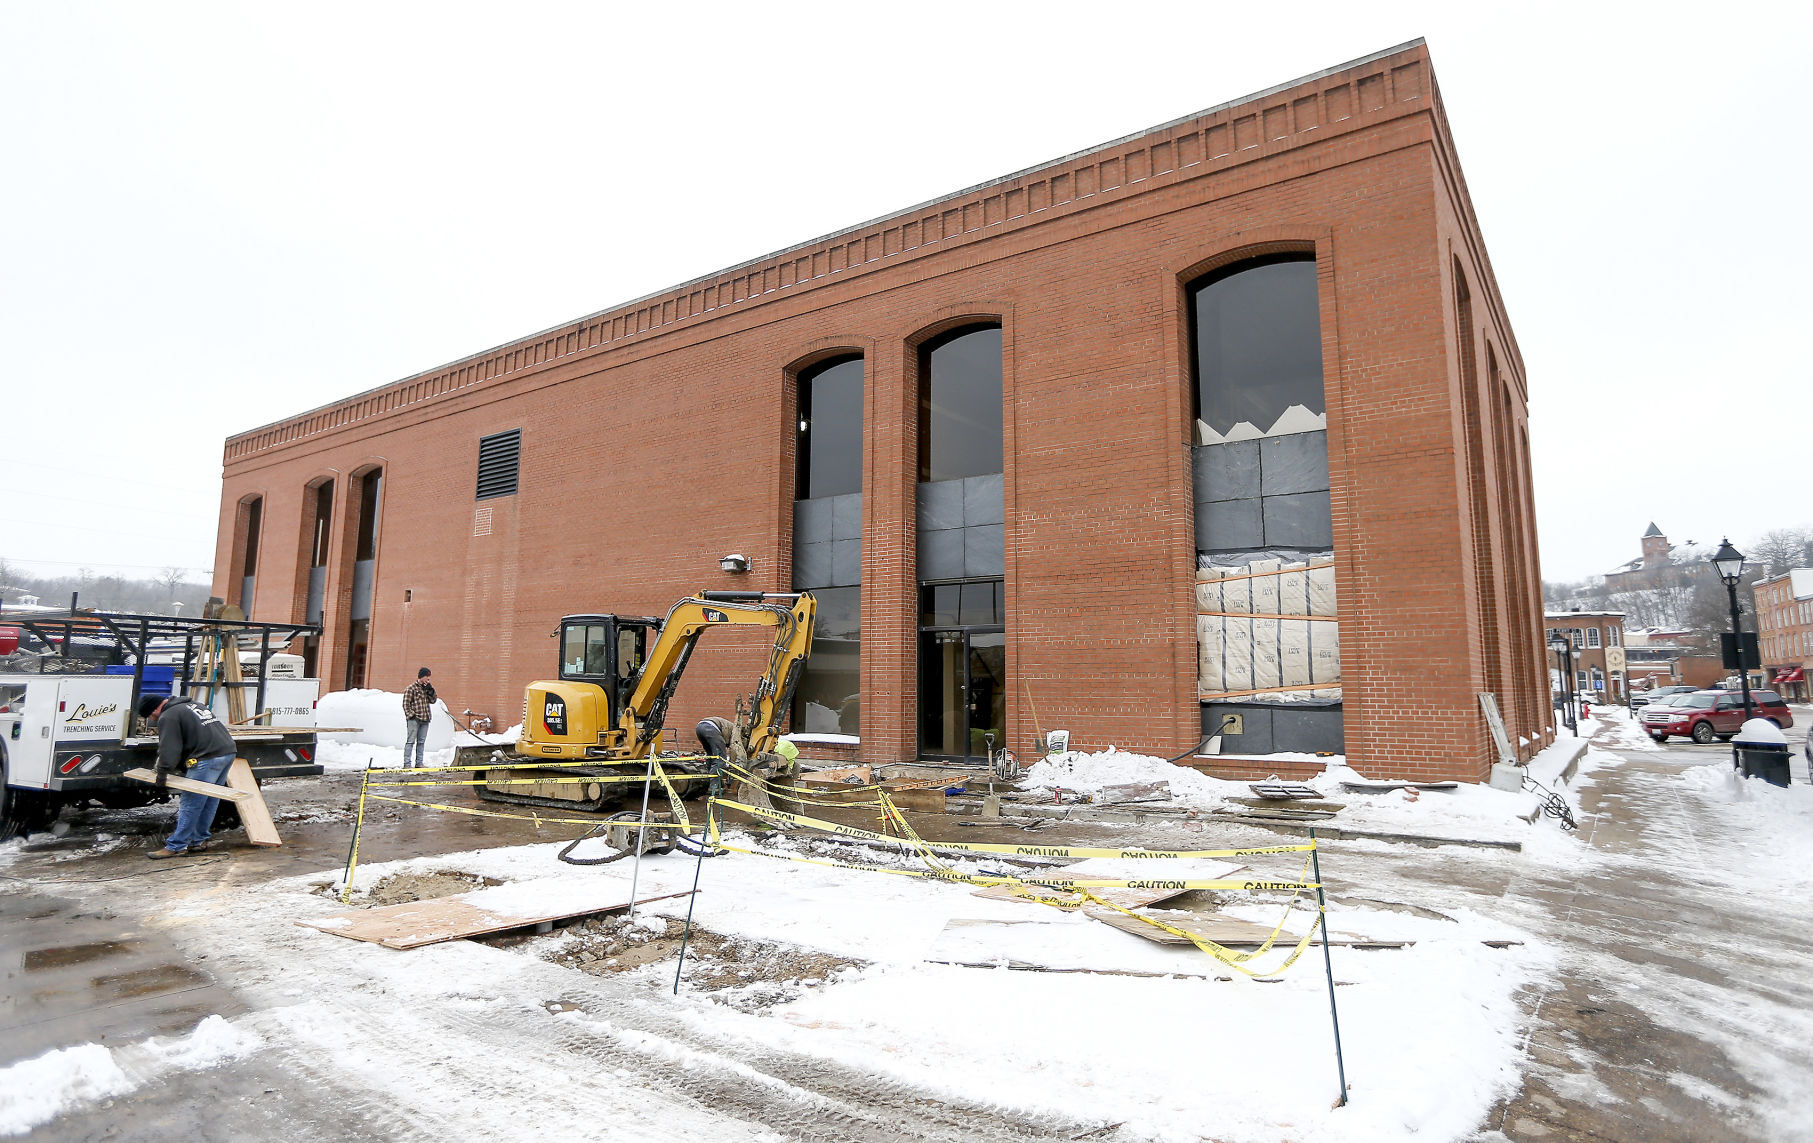 Employees of Redmond Construction Corp. work on the exterior of the future home of the PhamaCann/ Verilife dispensary located at the intersection of Commerce and Perry streets in Galena, Ill., on Wednesday. PHOTO CREDIT: Dave Kettering